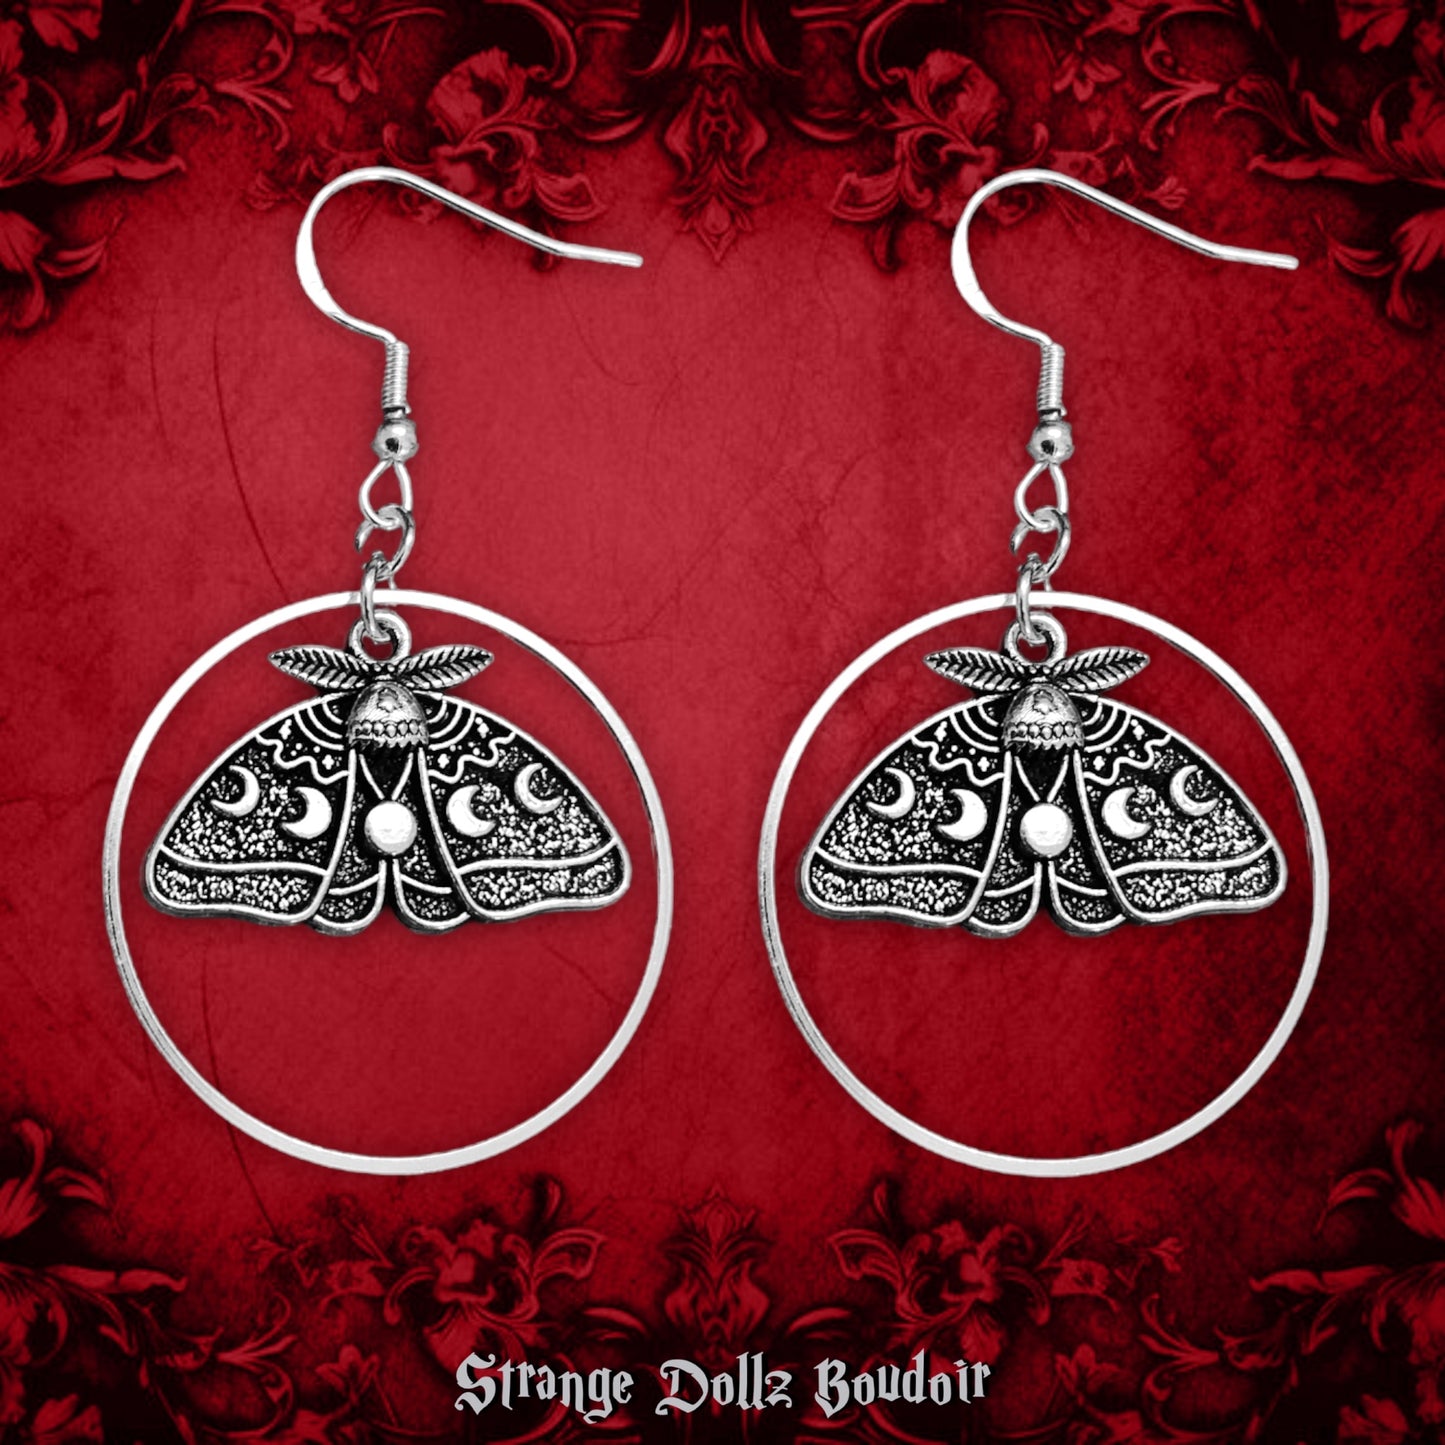 Ethereal Lunar Moth Earrings,  925 Sterling Silver, Witchy Gothic, Strange Dollz Boudoir